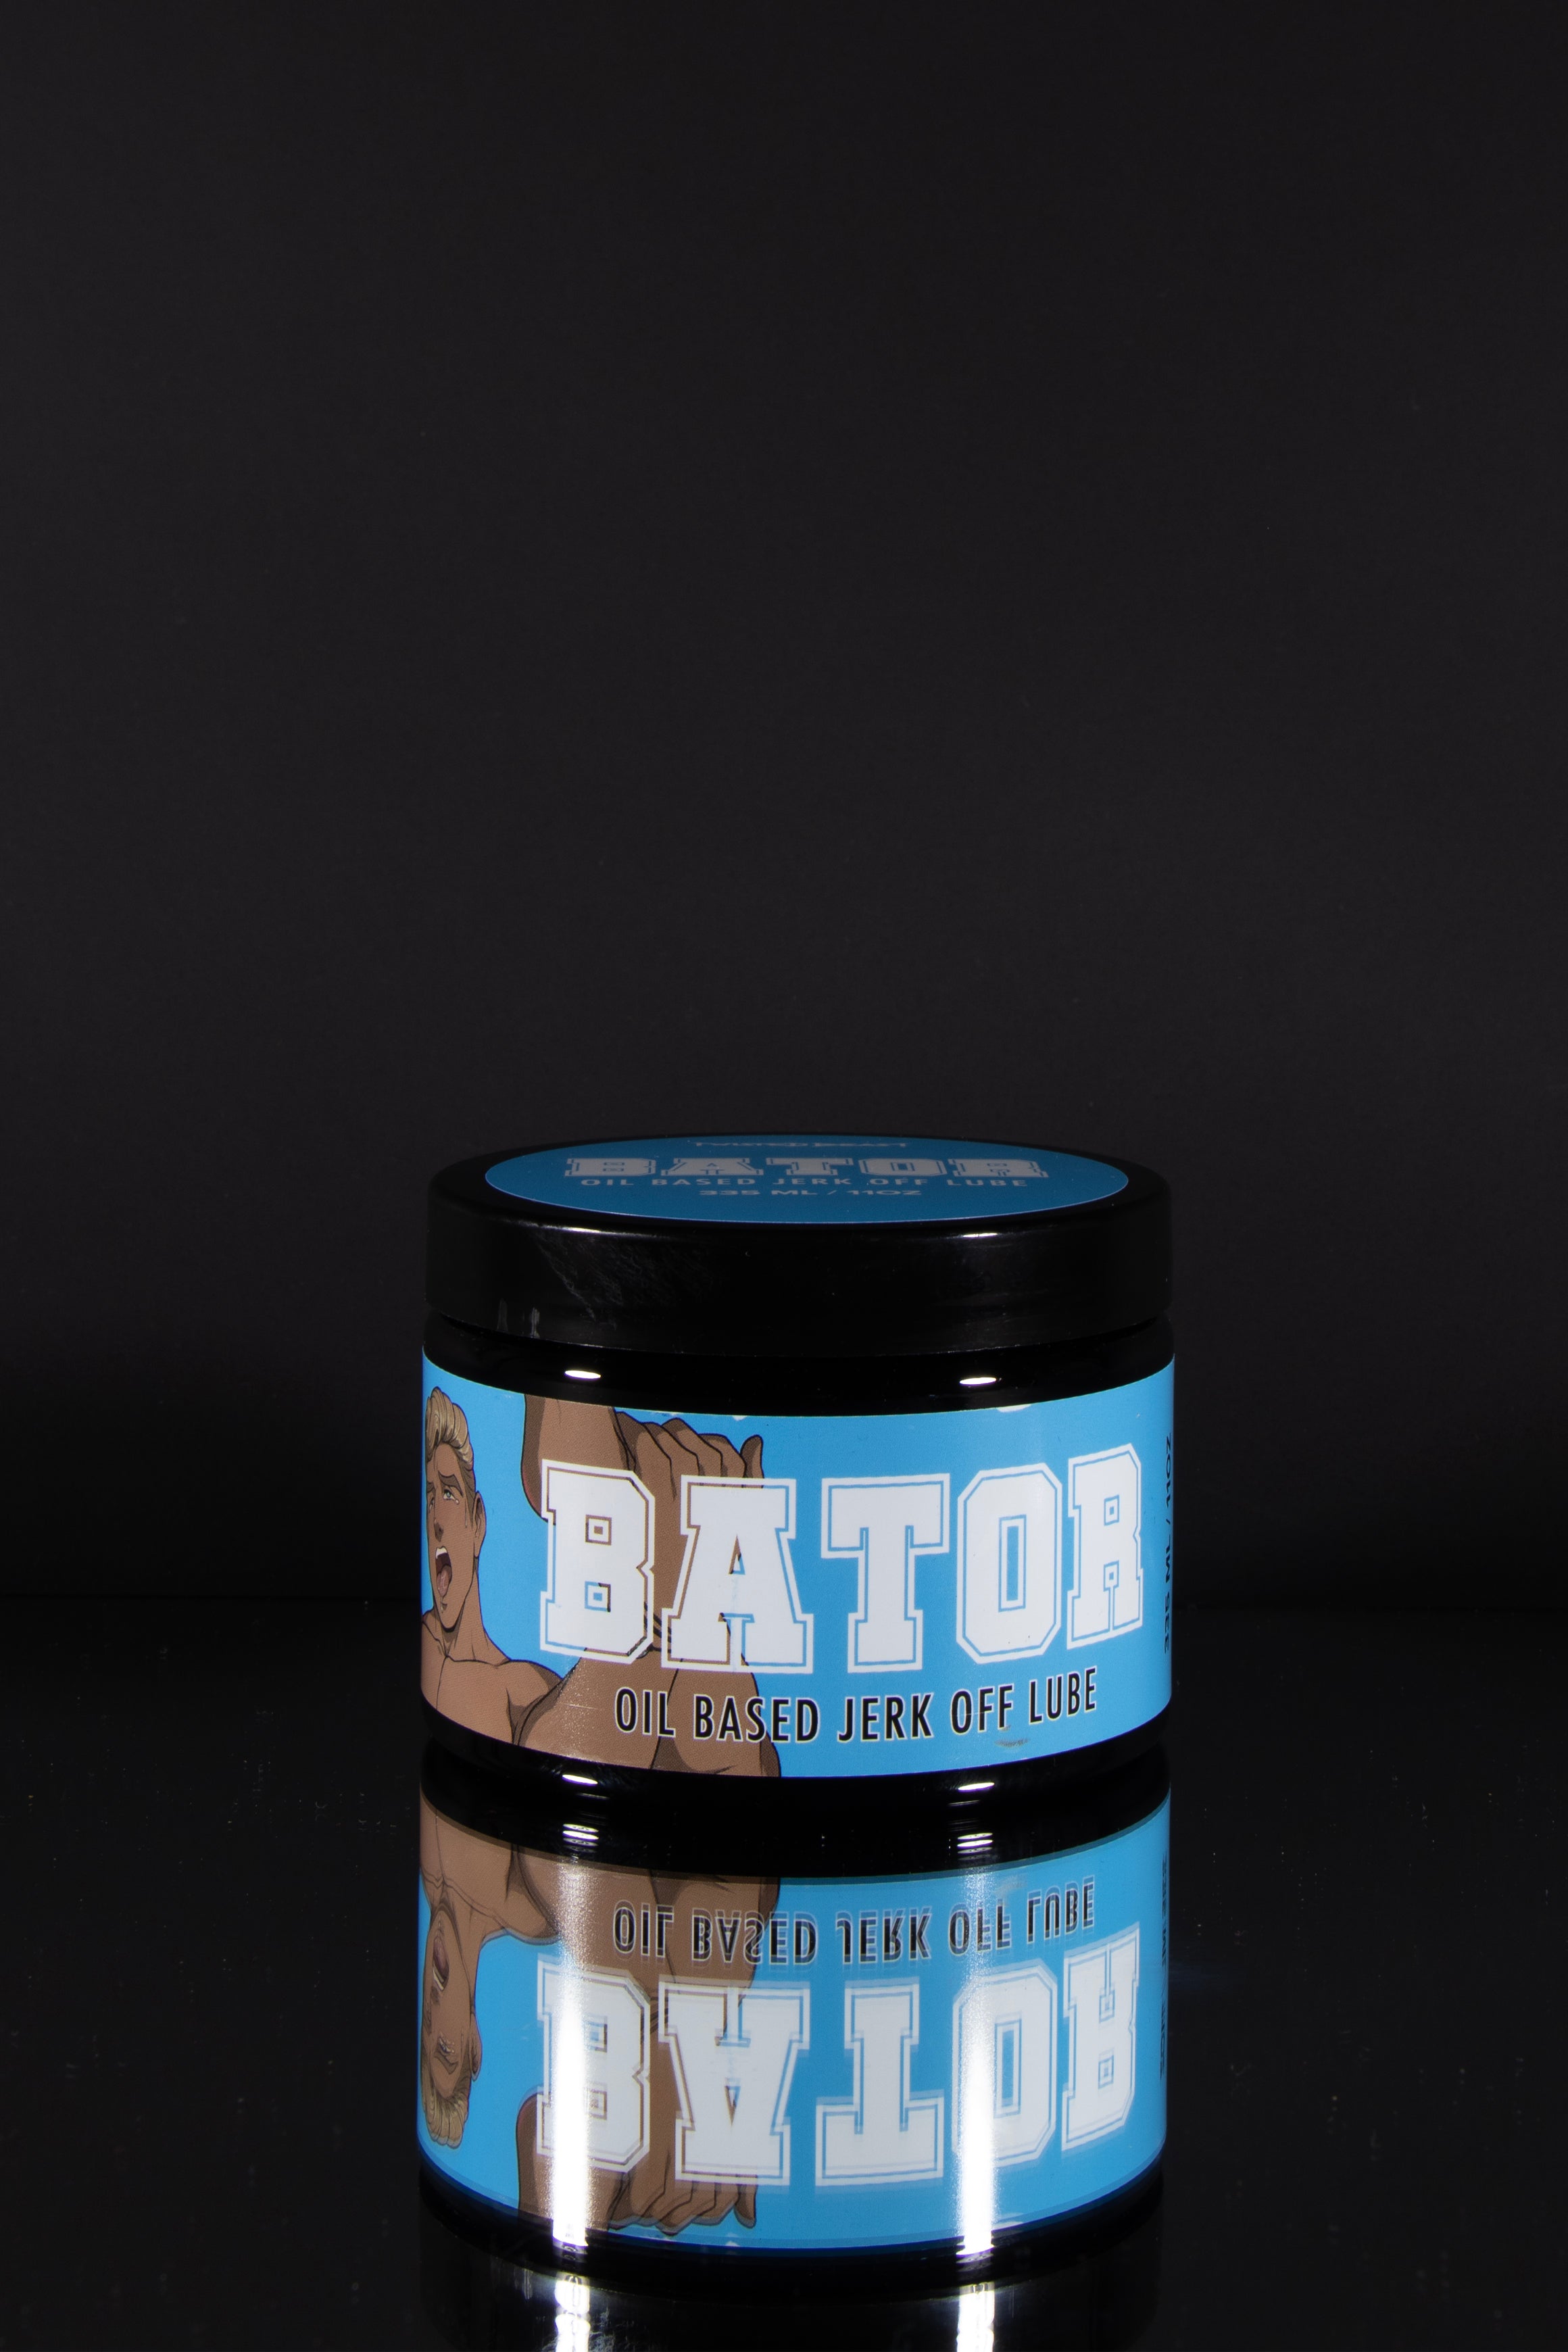 A product photo of Bator Balm by Twisted Beast.